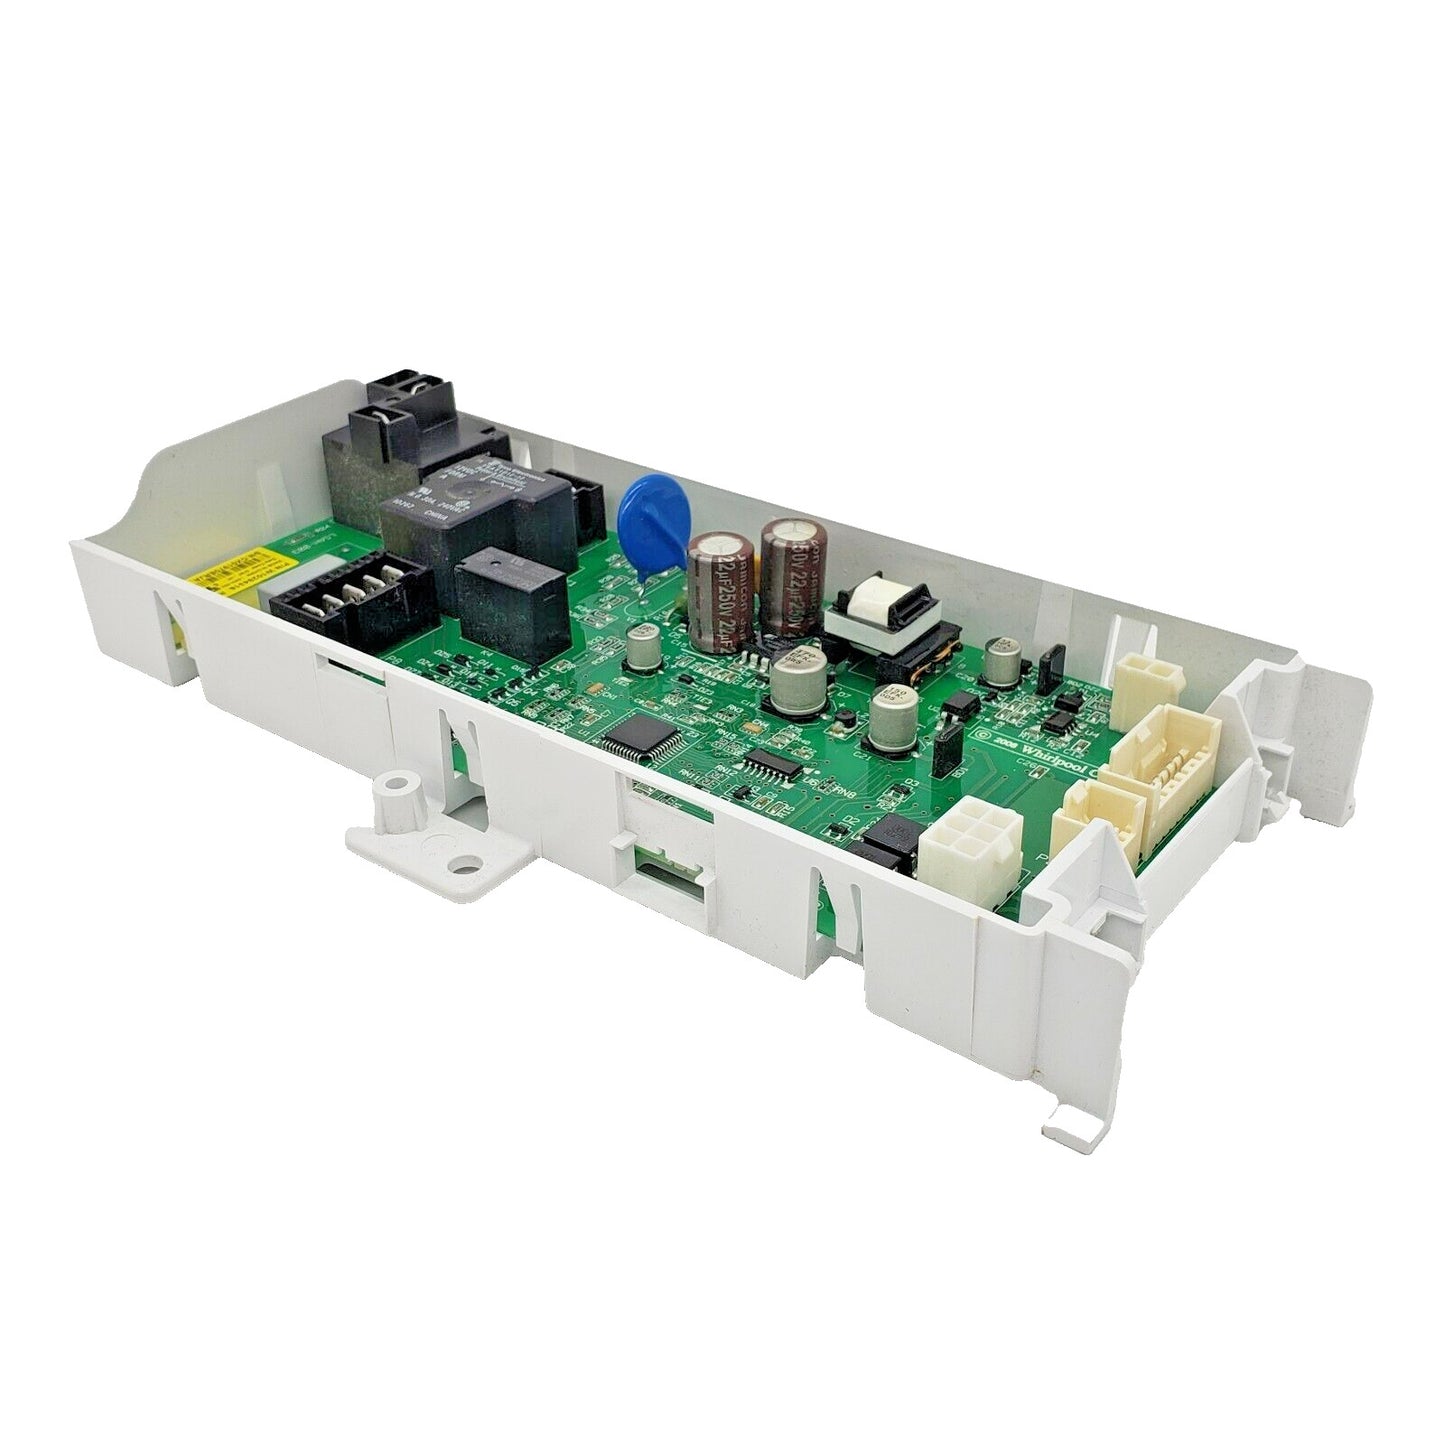 ⭐️OEM Replacement for Whirlpool Dryer Control W10294316🔥